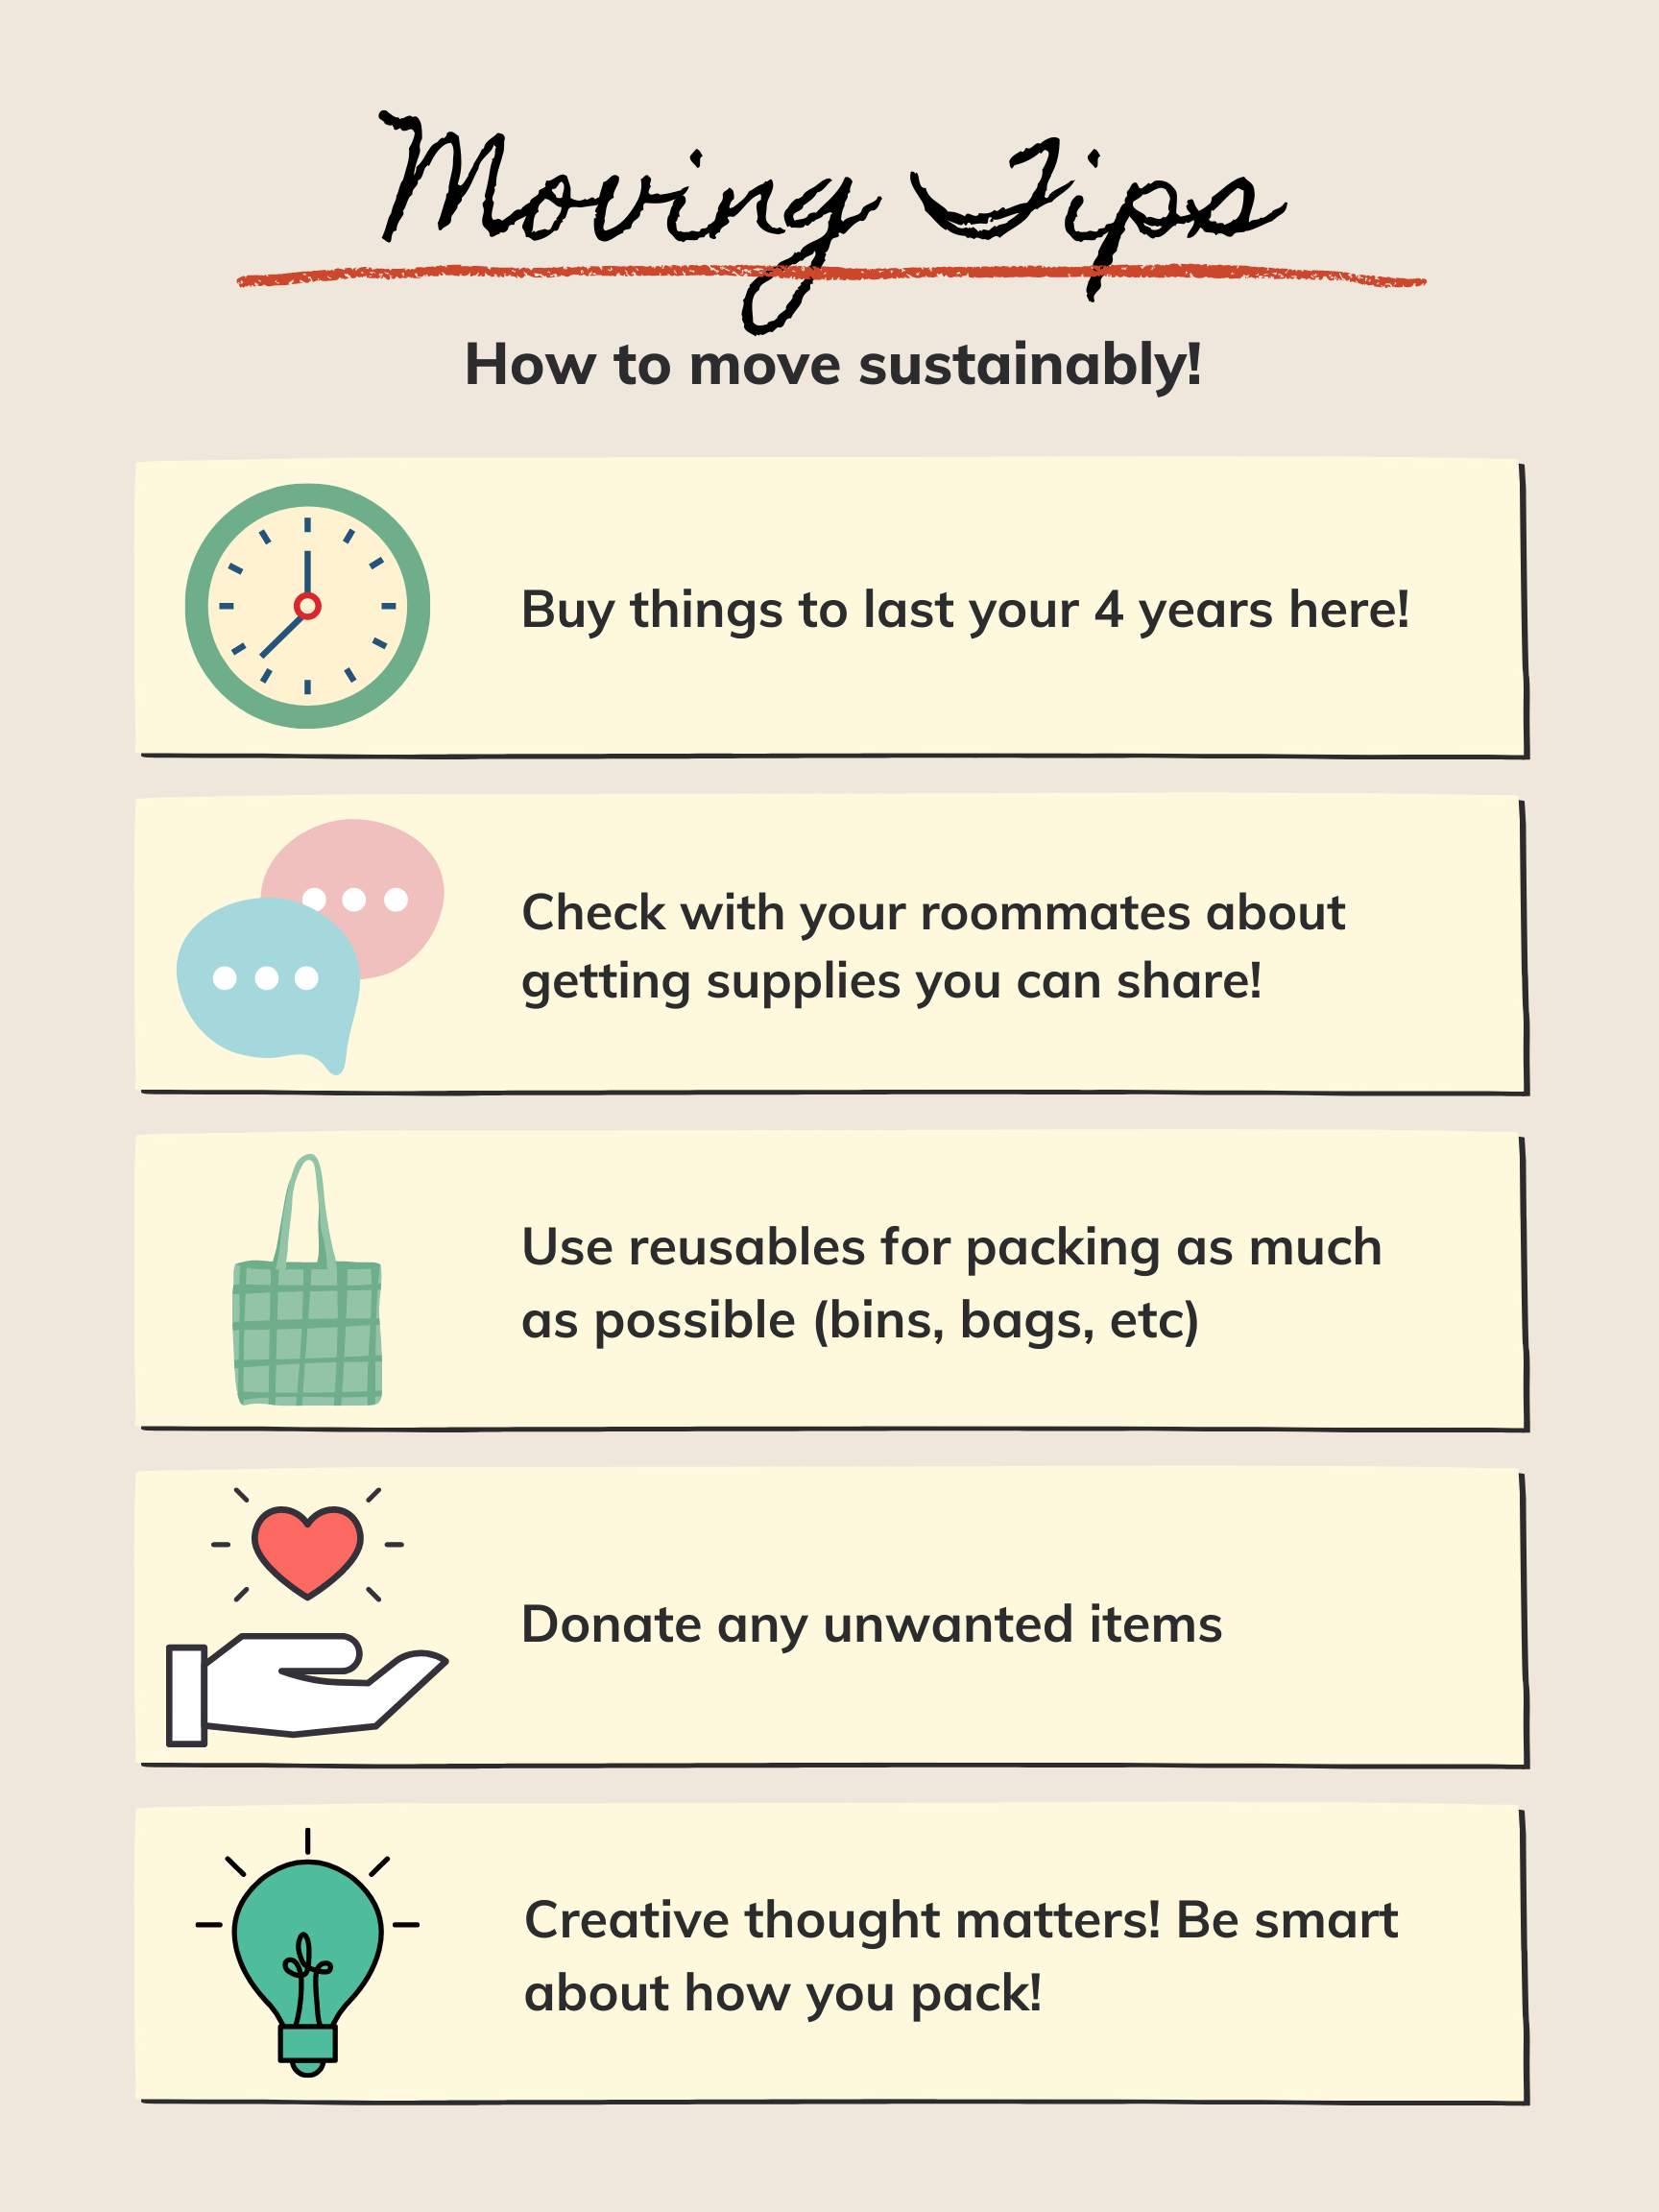 How to move sustainably... buy things to last your 4 years here! Check with your roommates about getting supplies you can share. Use reusables for packing as much as possible (bins, bags, etc). Donate any unwanted items. Creative thought matters! Be smart about how you pack.